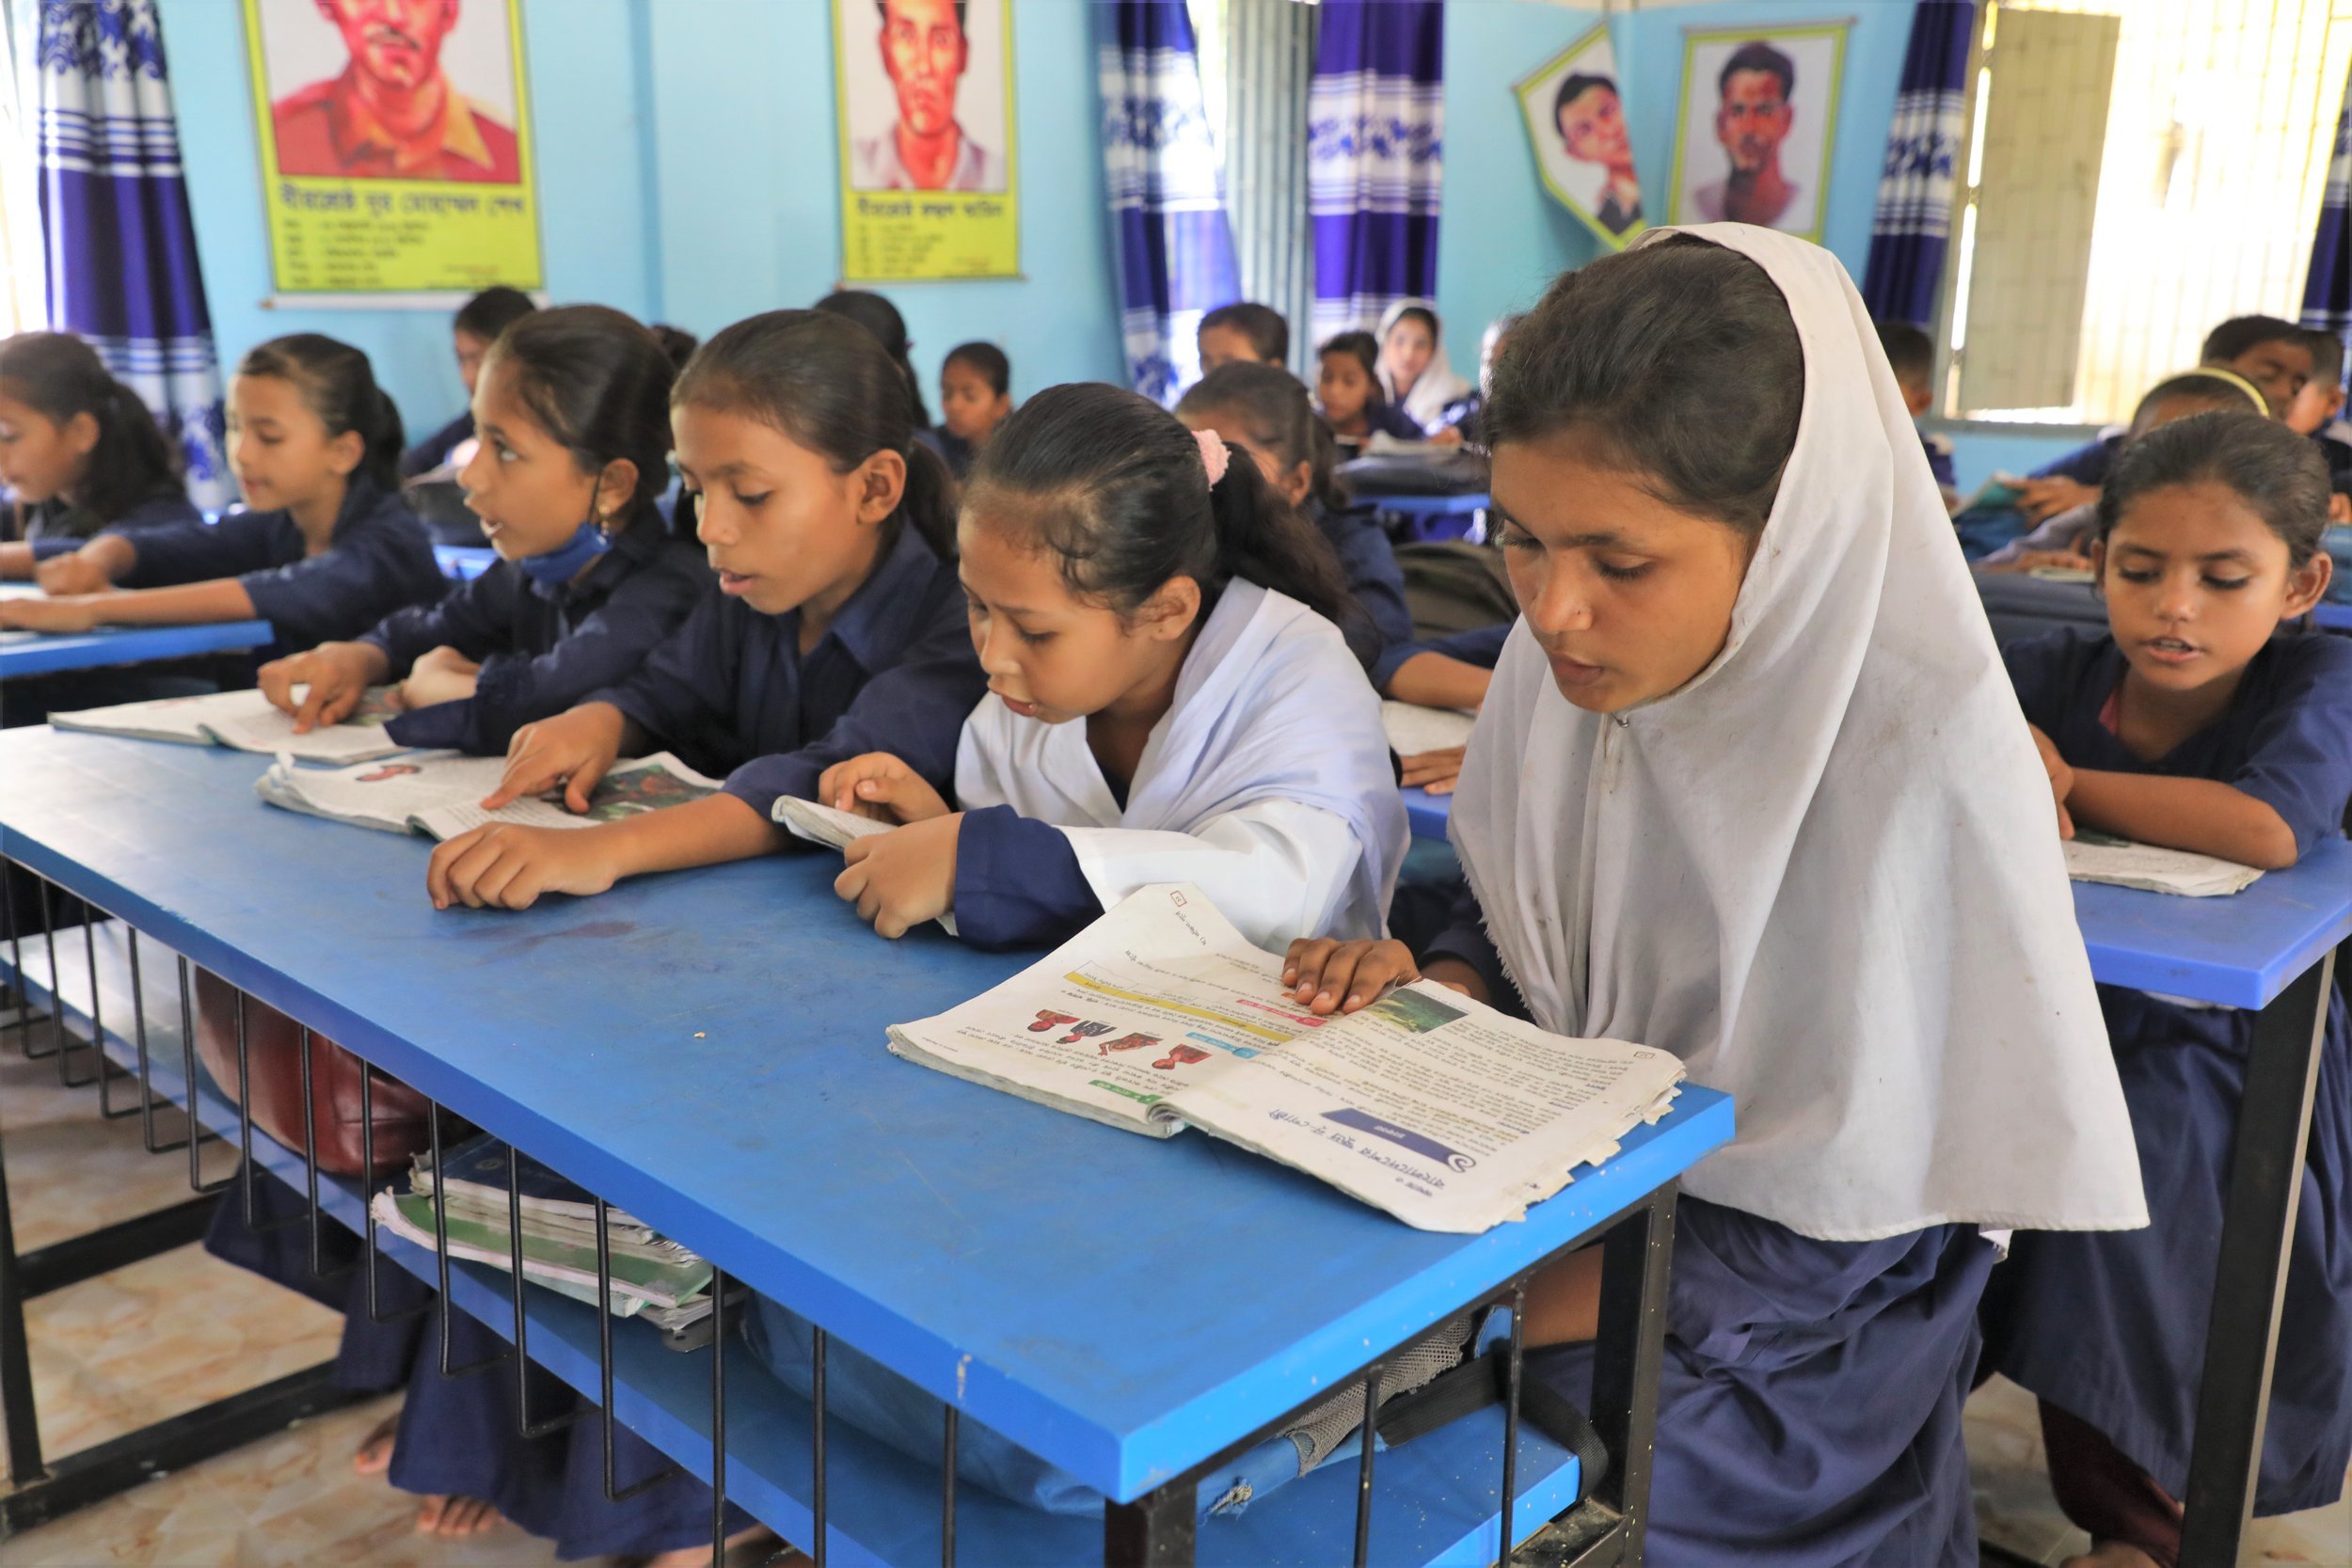  Above: Rifa reading a book in the classroom. She has returned to school after improving her confidence and communications skills in the adolescents club. Photo: Md. Qazi Shamim Hasan, World Vision Bangladesh 